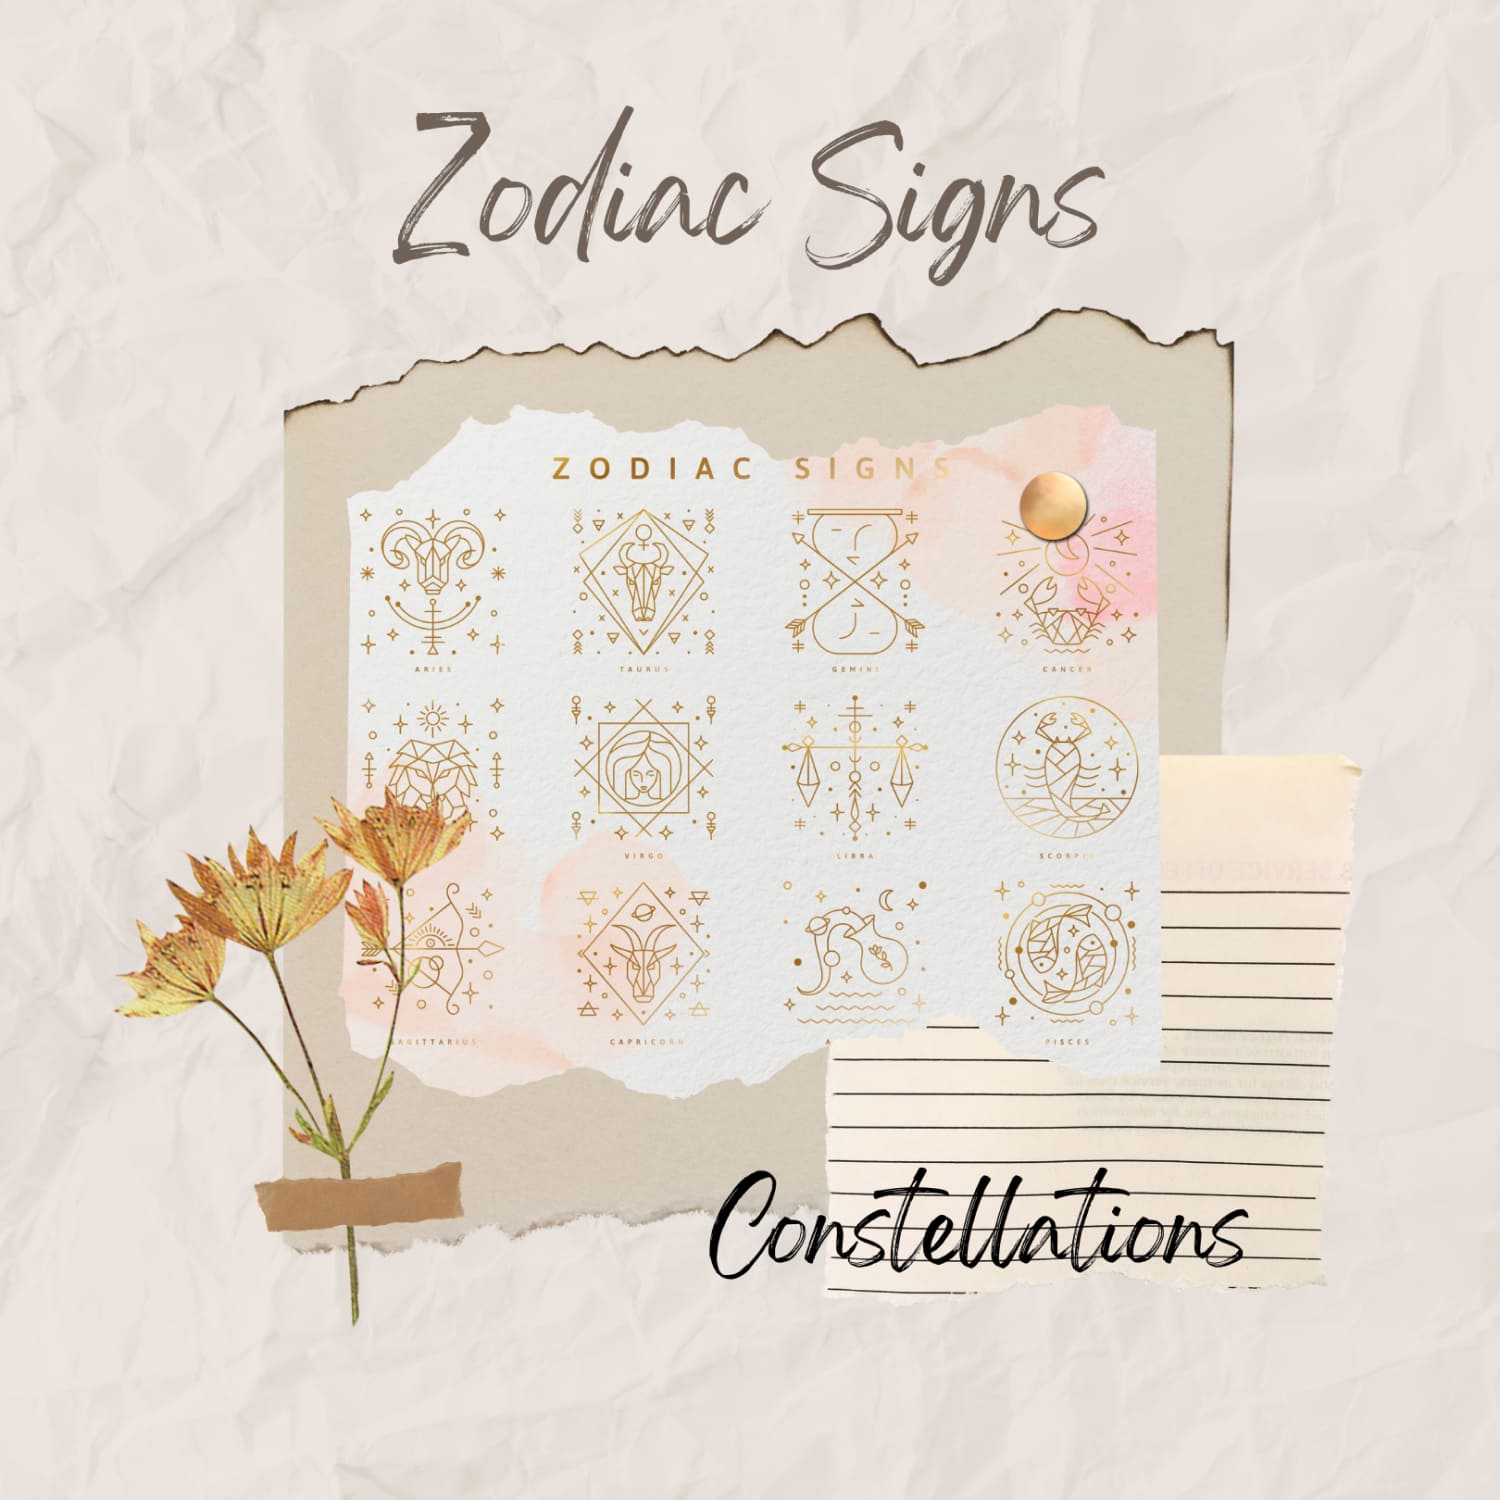 Zodiac Signs and Constellations.